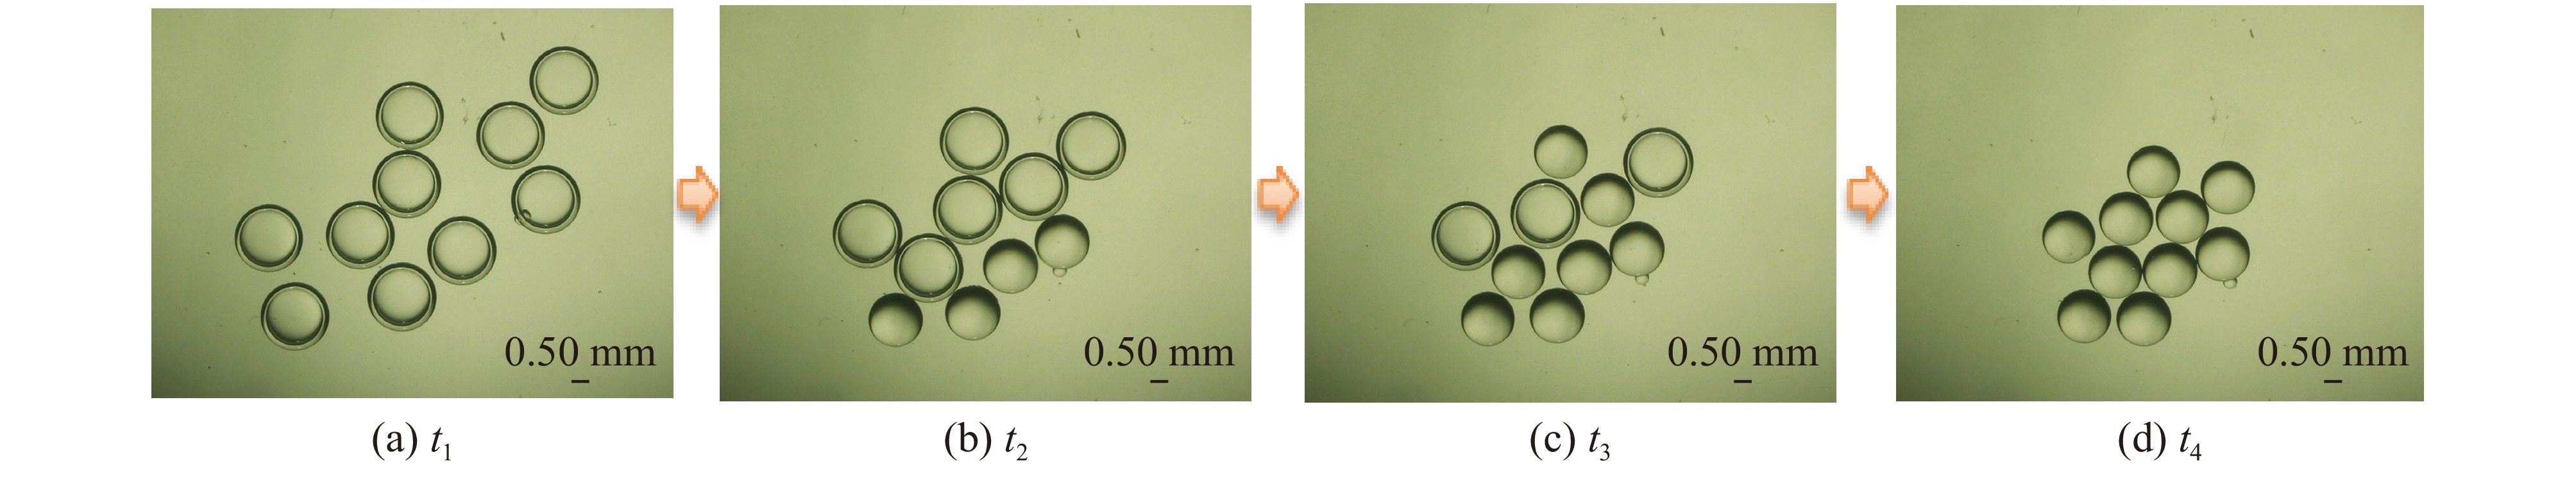 Instability of PS-1 compound droplets